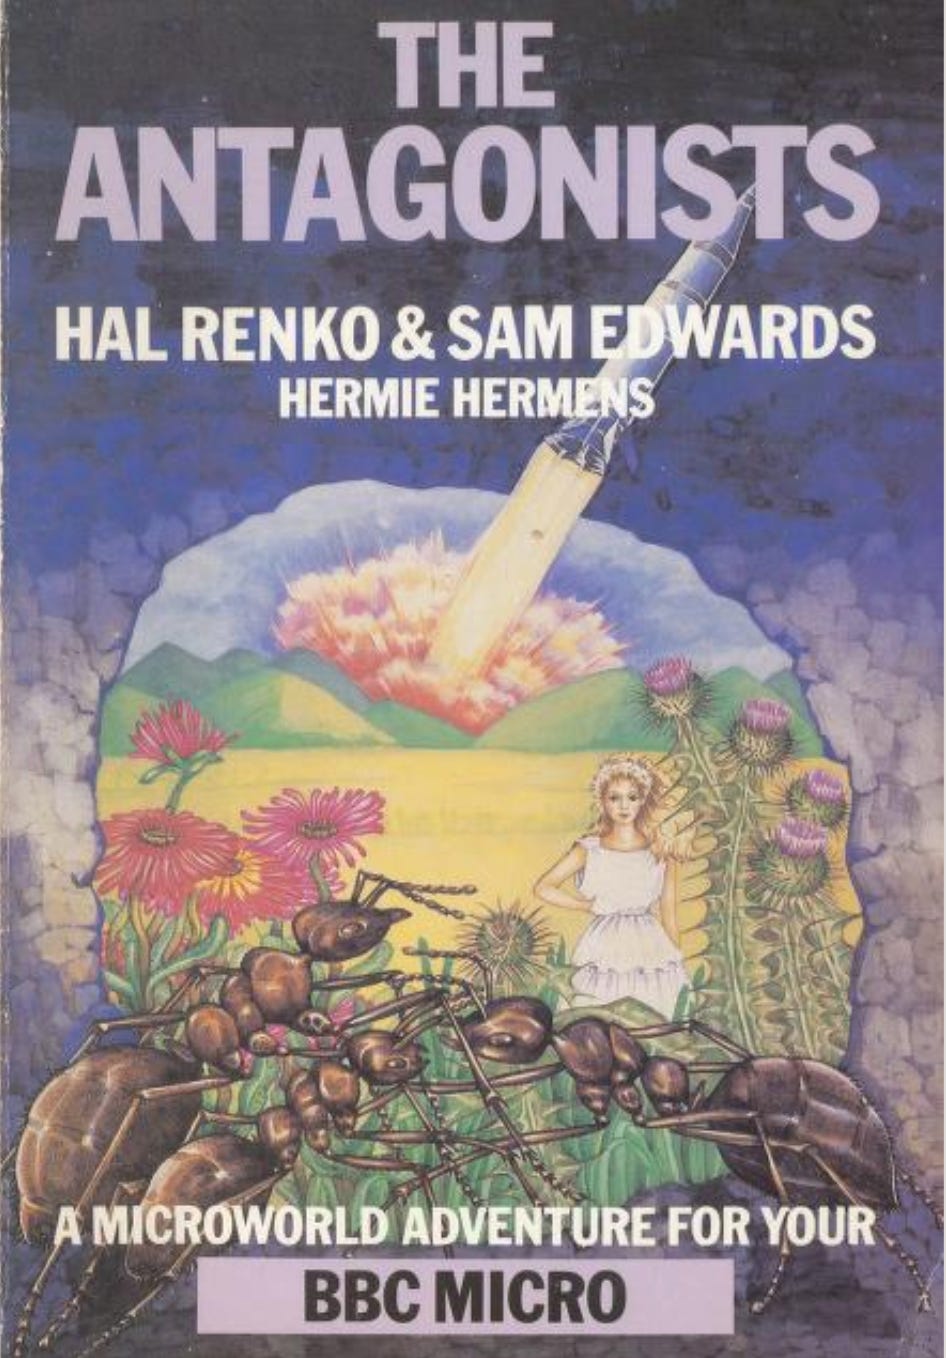 Book cover for "The Antagonists, by Hal Renko, Sam Edwards, and Hermie Hermens," with art showing a rocketship blasting off from a colorful landscape populated by large strange flowers, giant ants, and a fairy woman in a white dress.